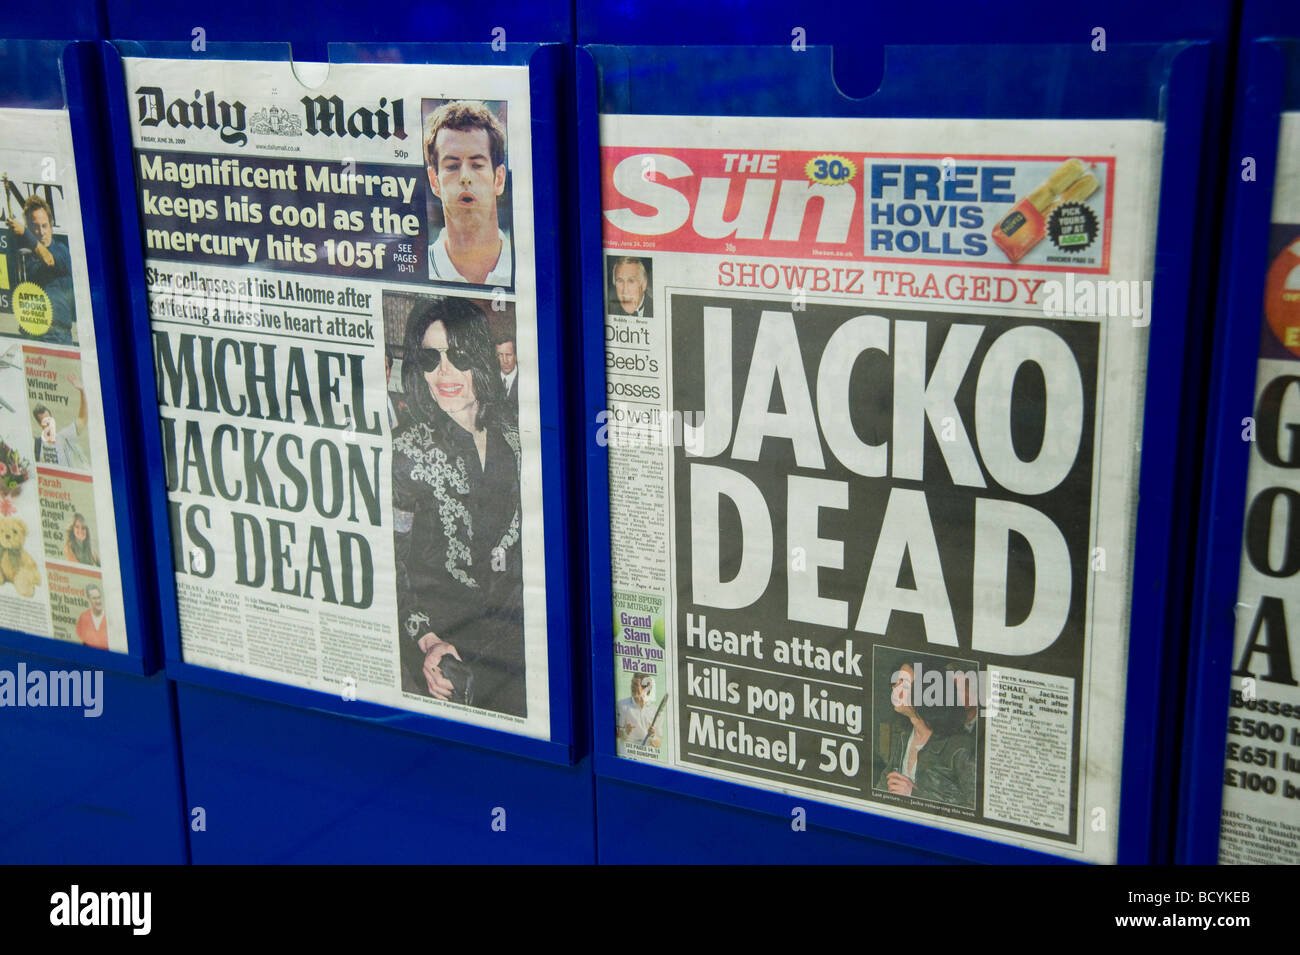 Michael Jackson is Dead headlines in the British National newspapers Stock Photo